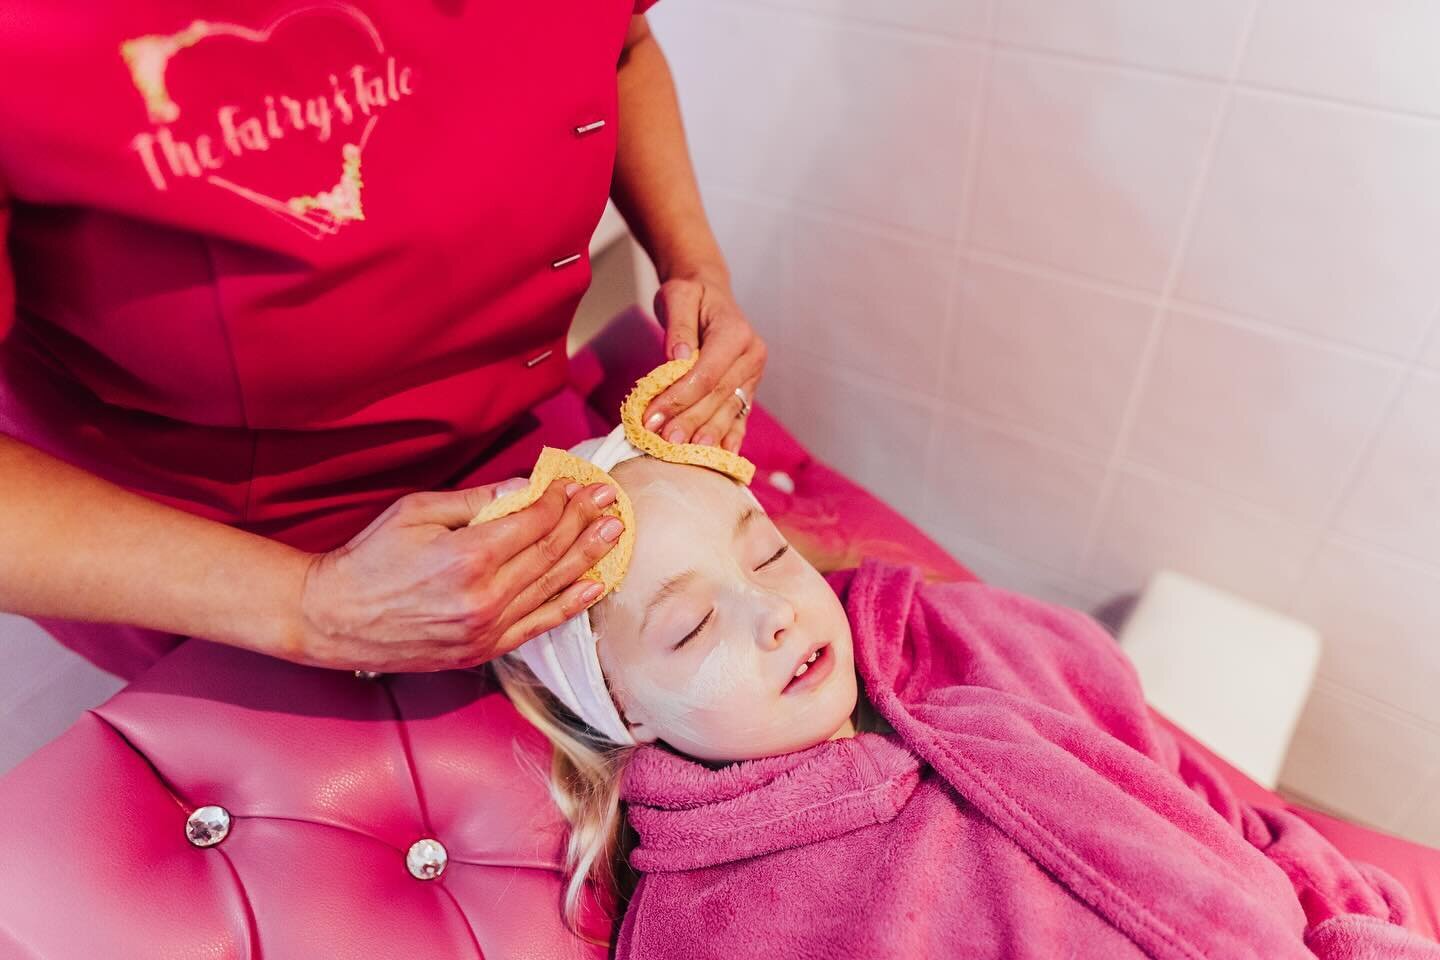 New individual spa sessions 💅🏻 You asked we delivered! Special package created for one child 💝
Includes: Mini facial, foot spa, manicure, glitter tattoo, makeup and hair style. &pound;45 Coloured hair can also be added on. Book via our box office 